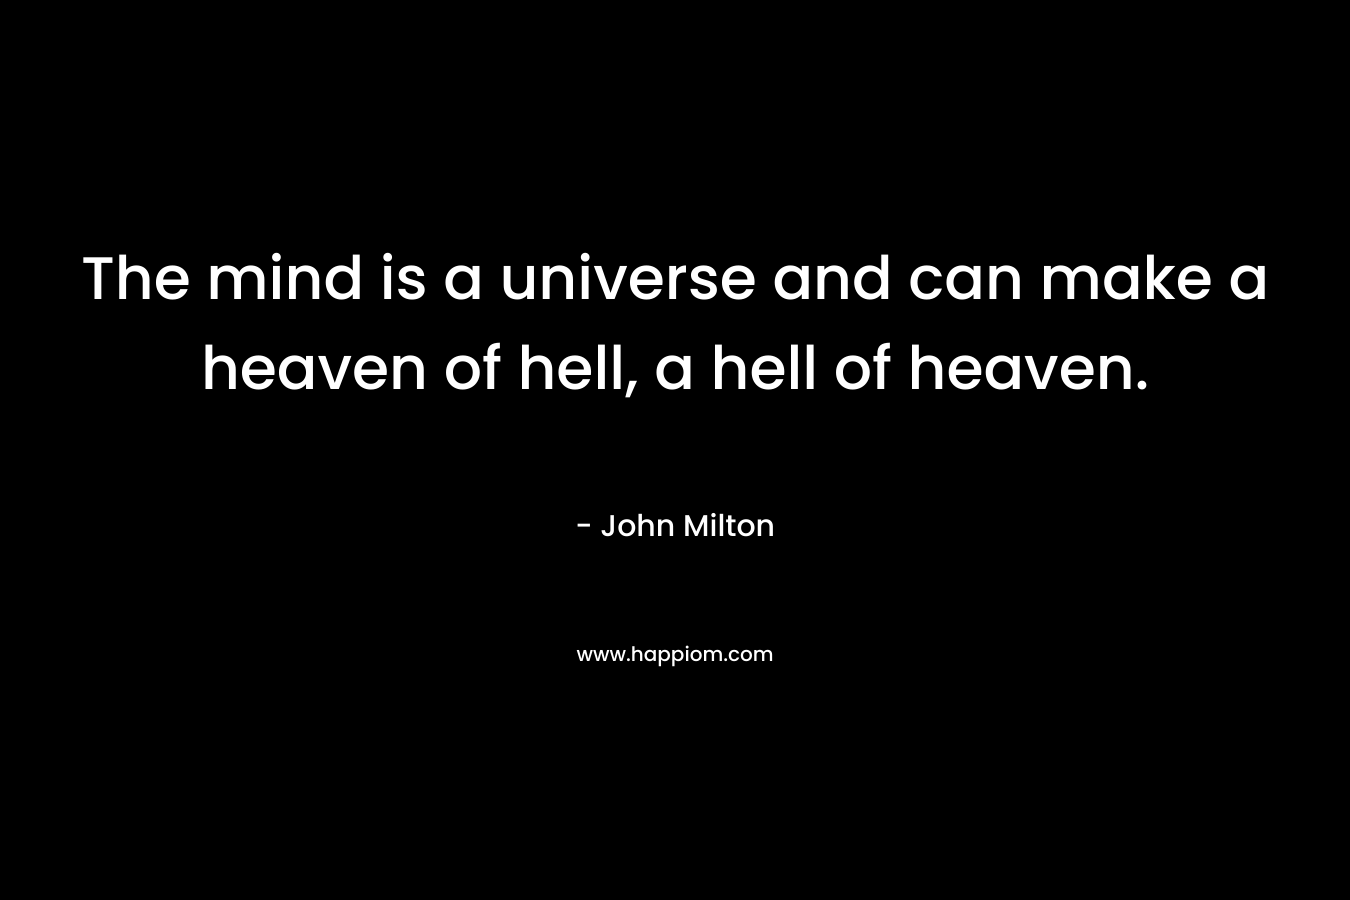 The mind is a universe and can make a heaven of hell, a hell of heaven. – John Milton